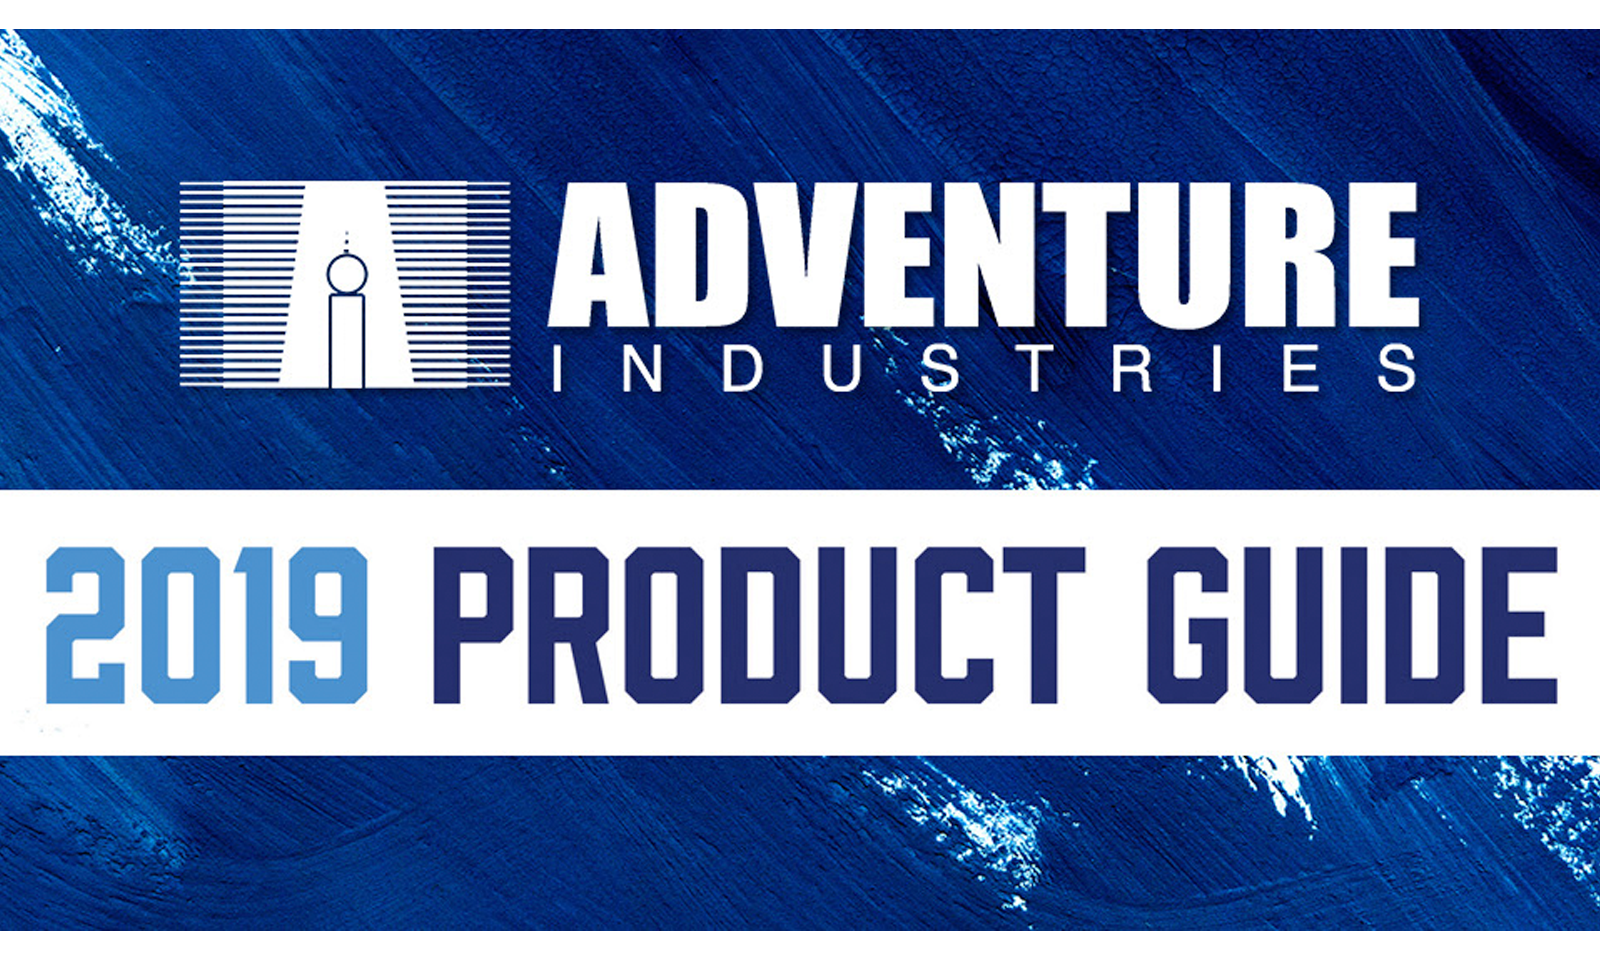 New Digital Catalog Available From Adventure Industries